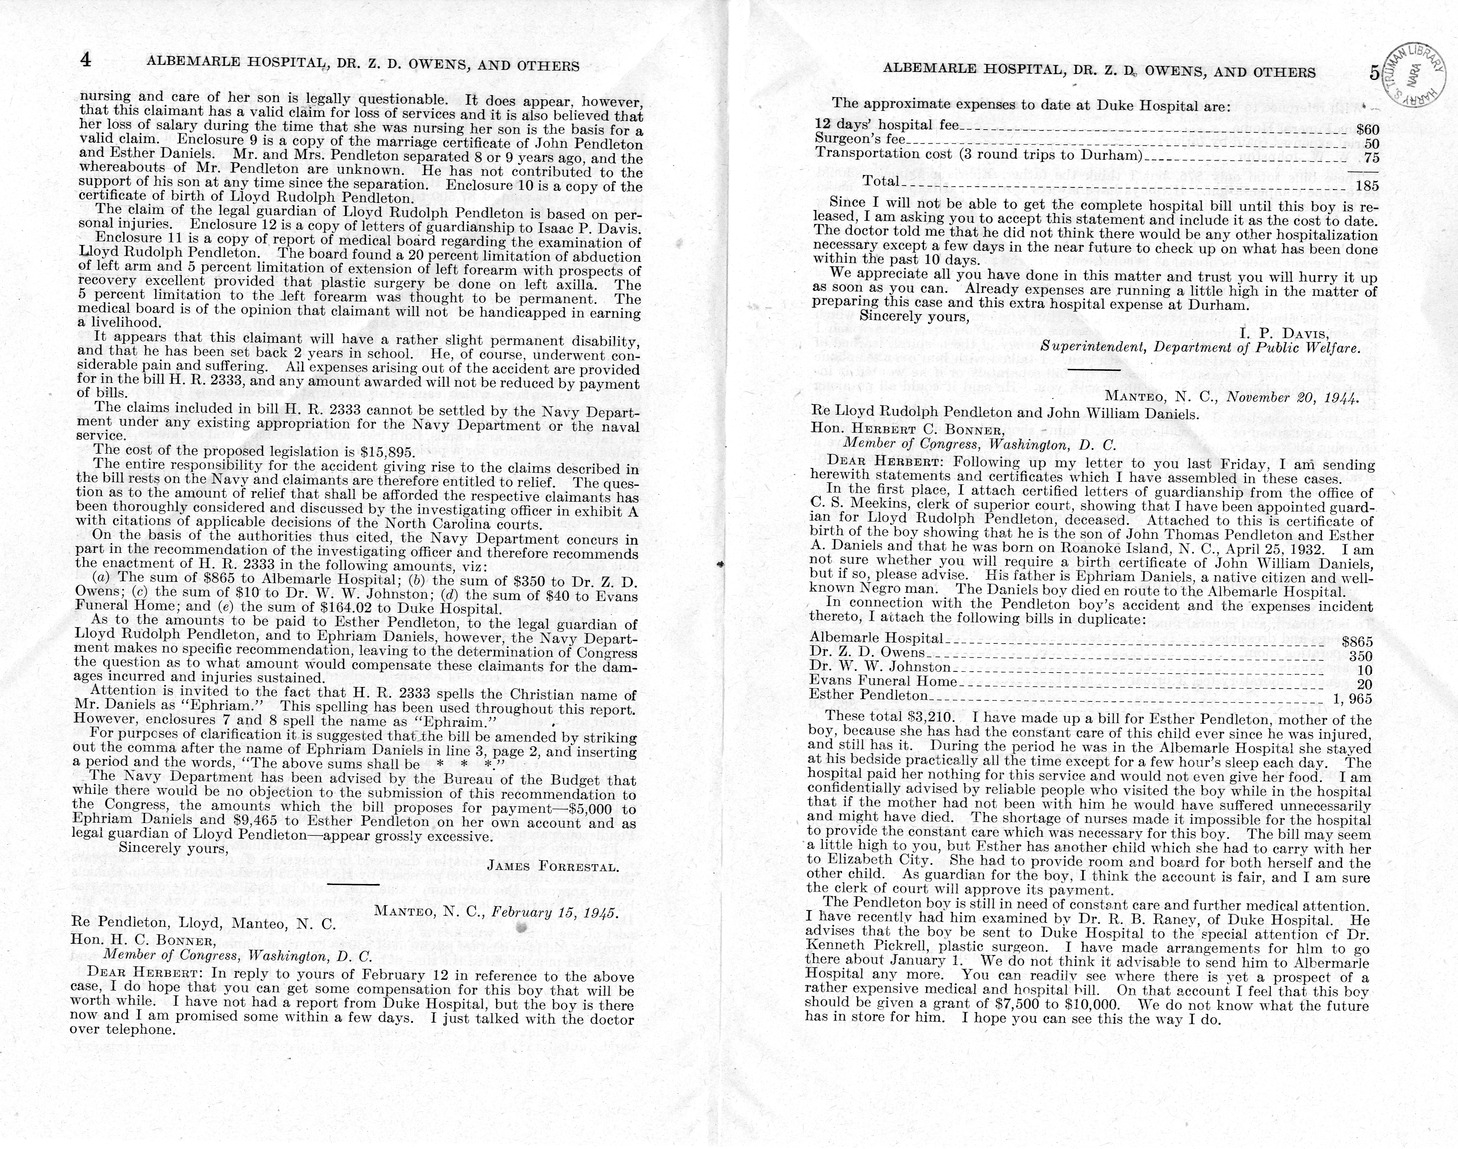 Memorandum from Frederick J. Bailey to M. C. Latta, H.R. 2333, For the Relief of Albemarle Hospital, Doctor Z. D. Owens, Doctor W. W. Johnston, Evans Funeral Home, Esther Pendleton, Legal Guardian of Lloyd Pendleton, Duke Hospital, and Ephriam Daniels, with Attachments